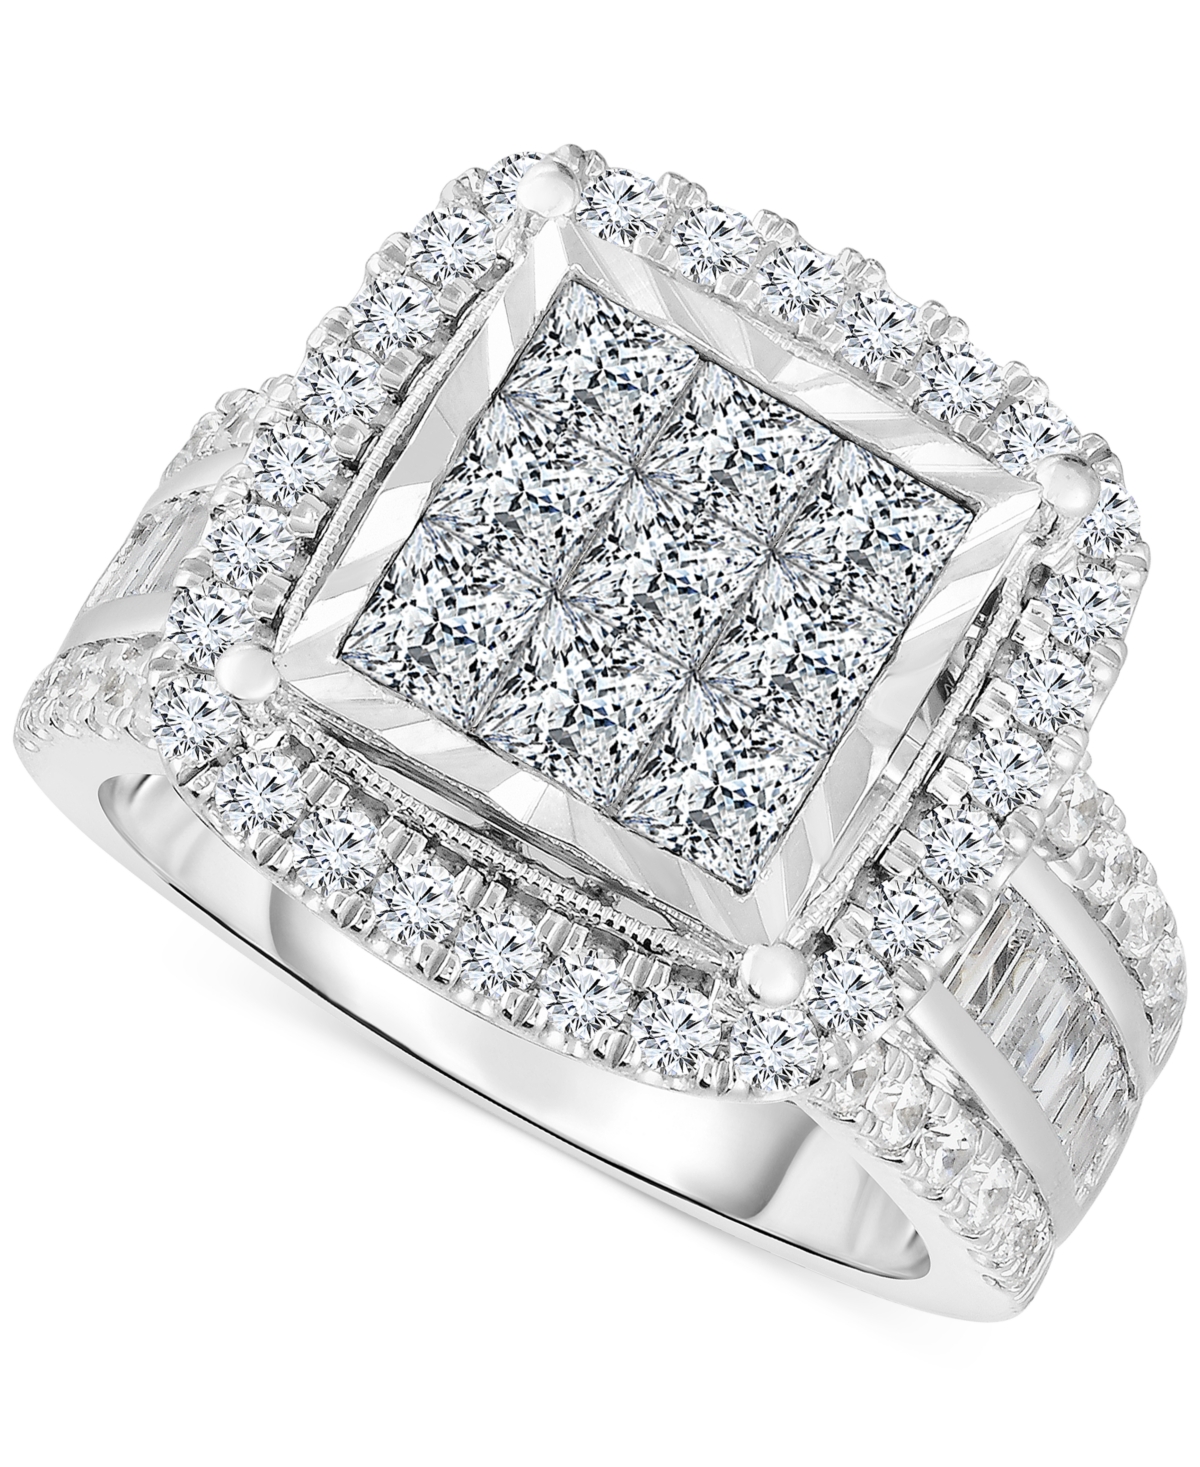 Diamond Princess Cluster Engagement Ring (3 ct. t.w.) in 10k White Gold - White Gold